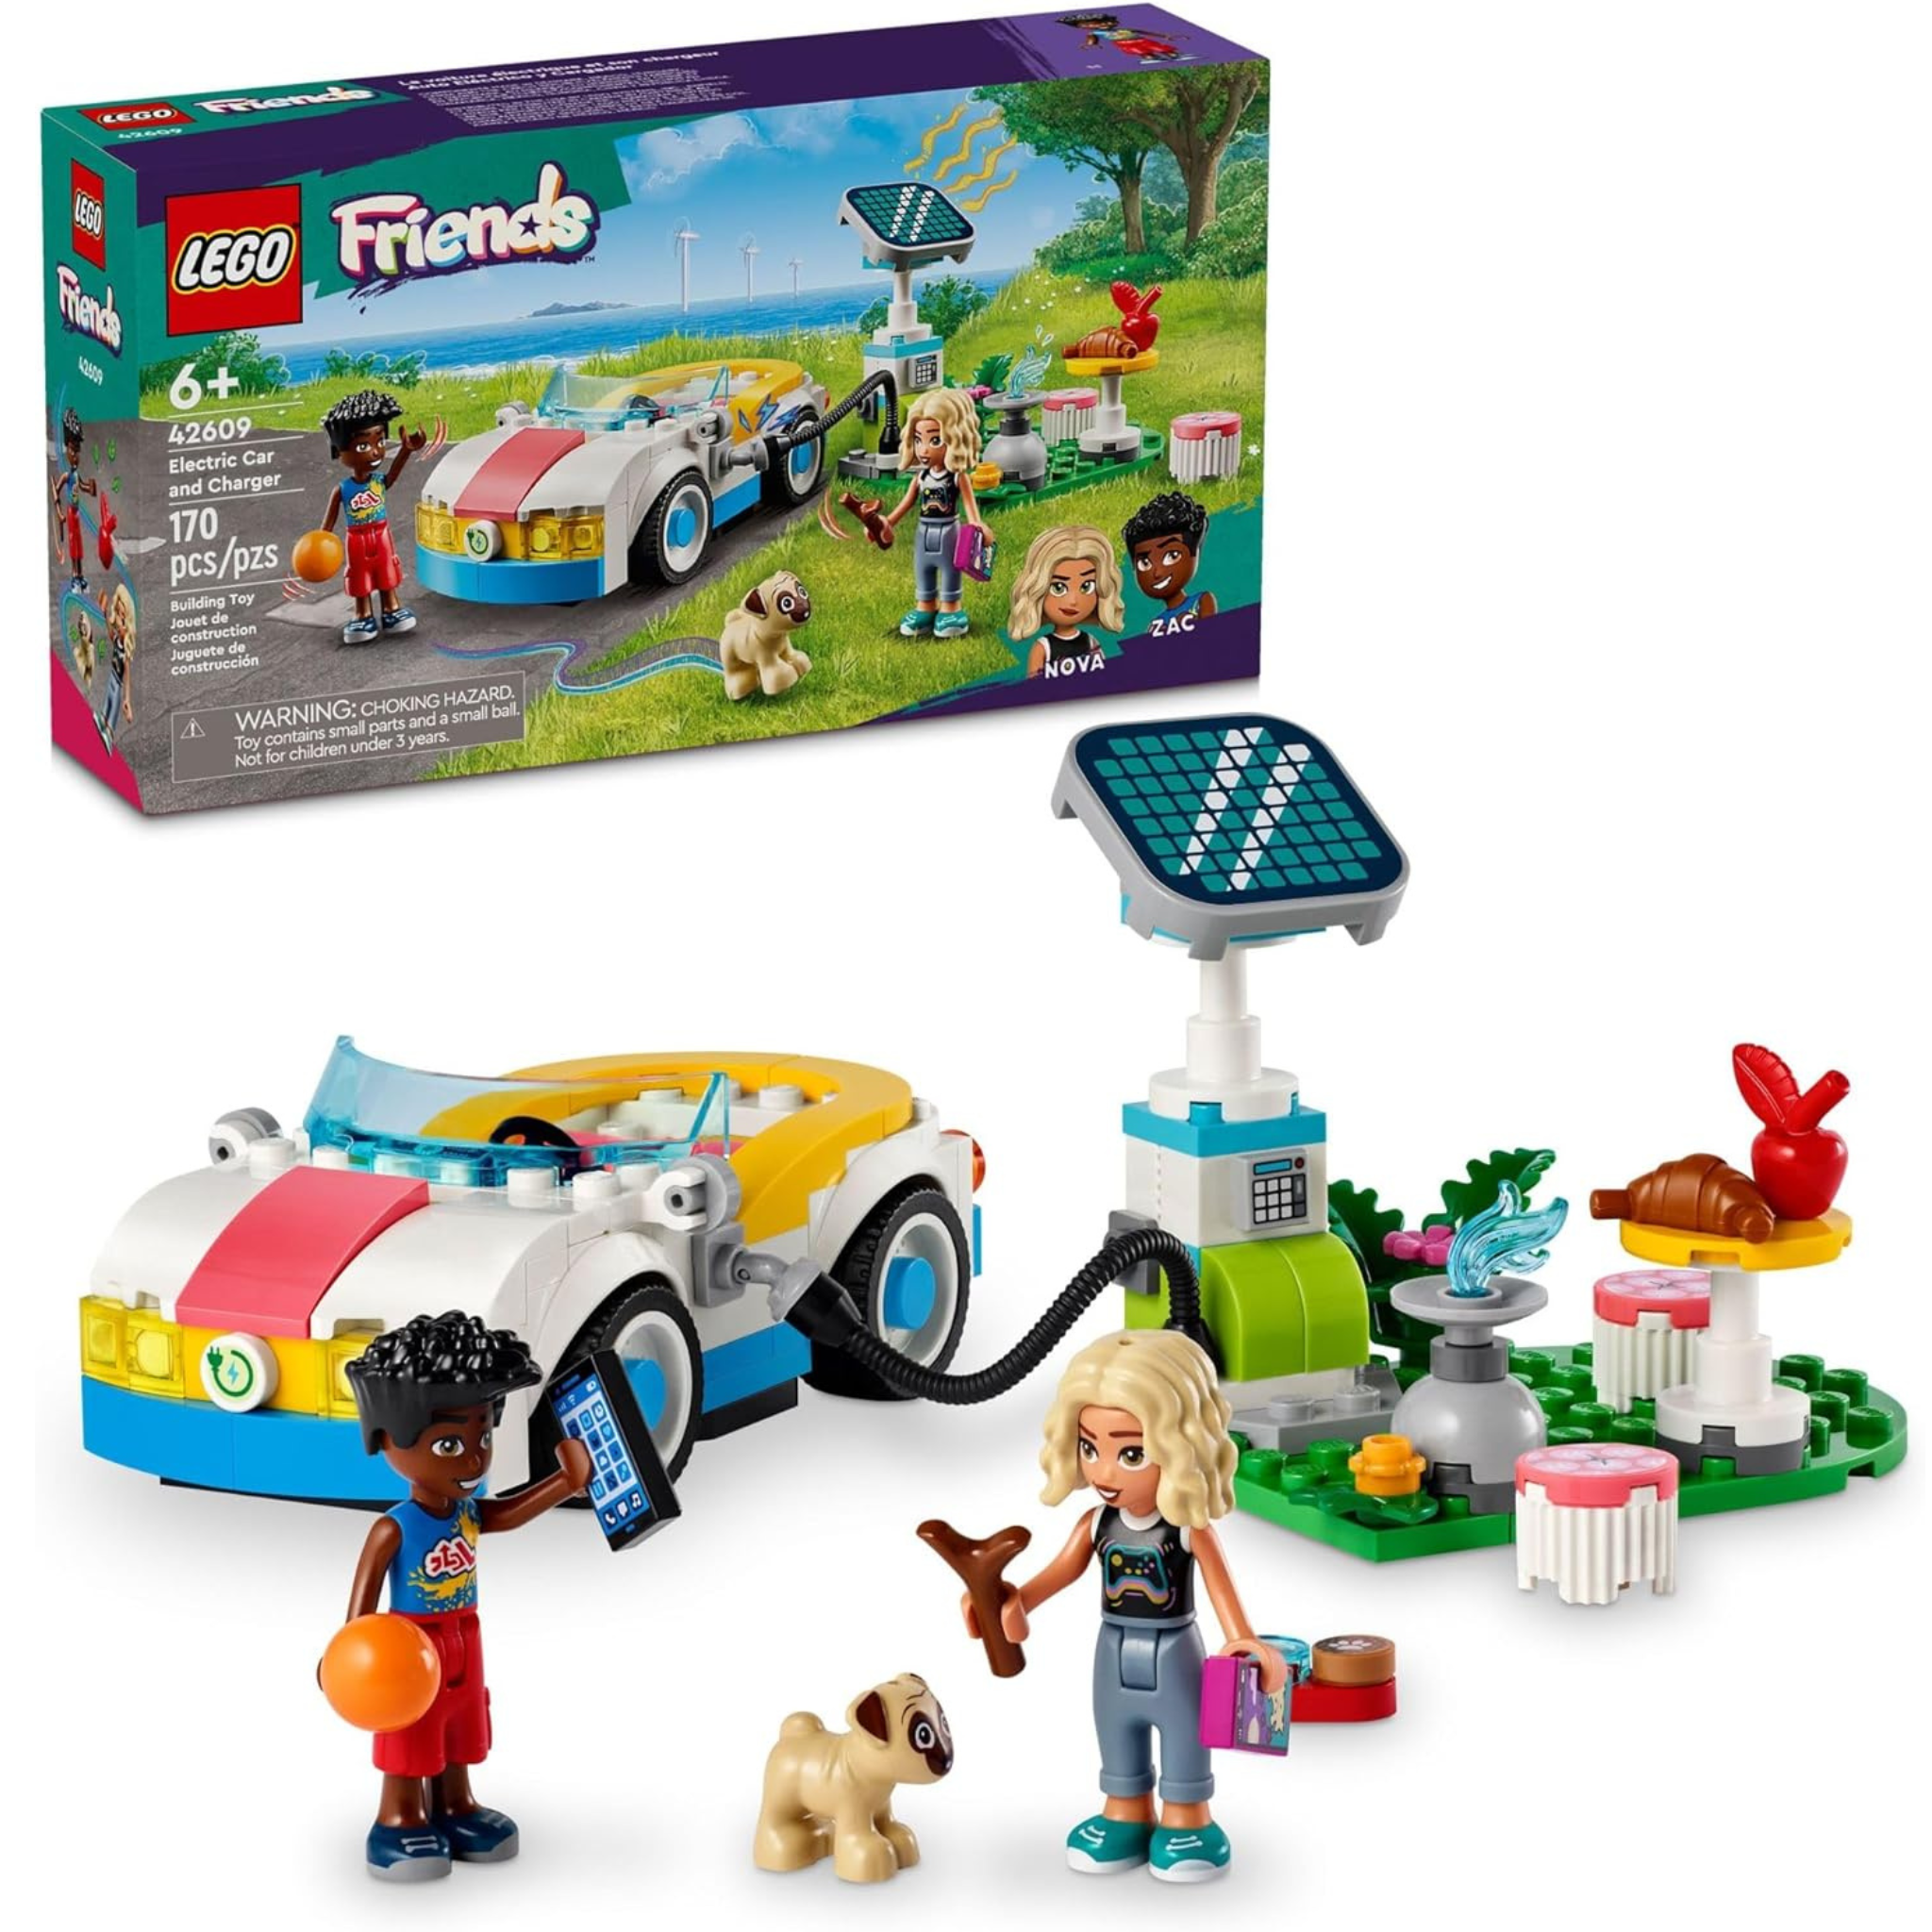 LEGO Friends Electric Car and Charger Building Toy